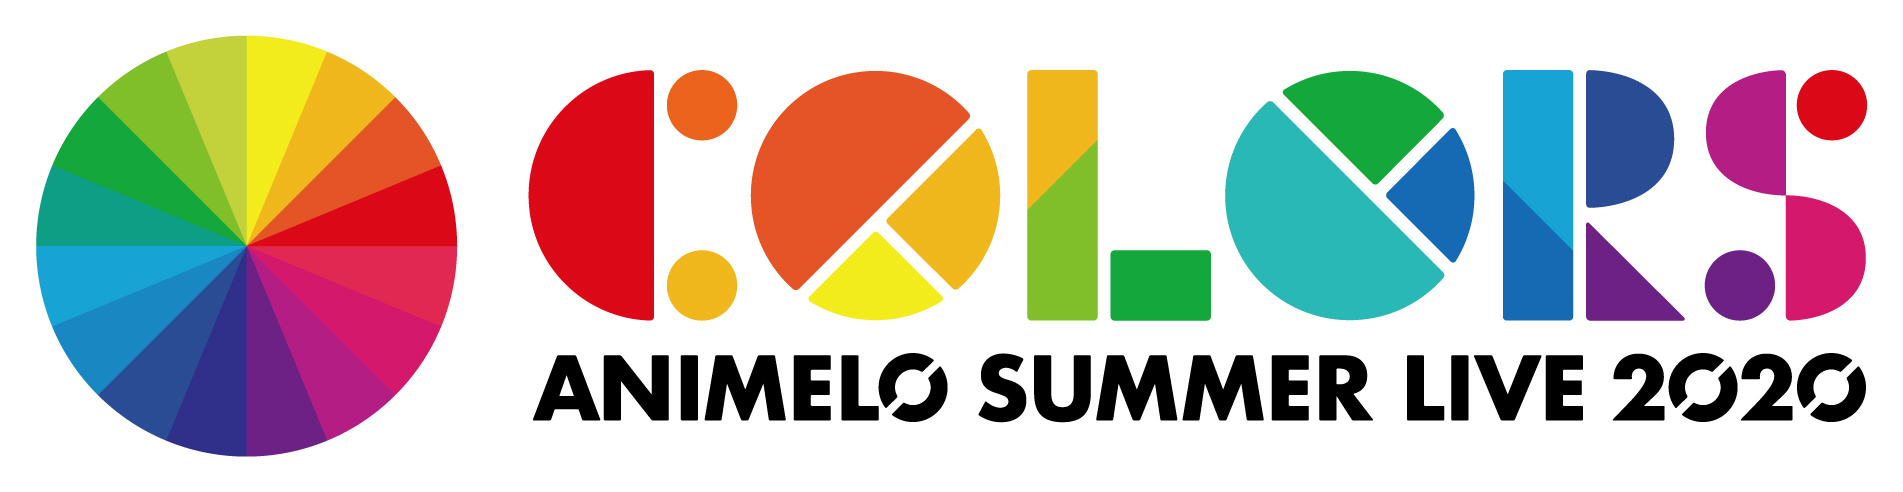 『Animelo Summer Live 2020 –COLORS-』ロゴ (c)Animelo Summer Live 2020